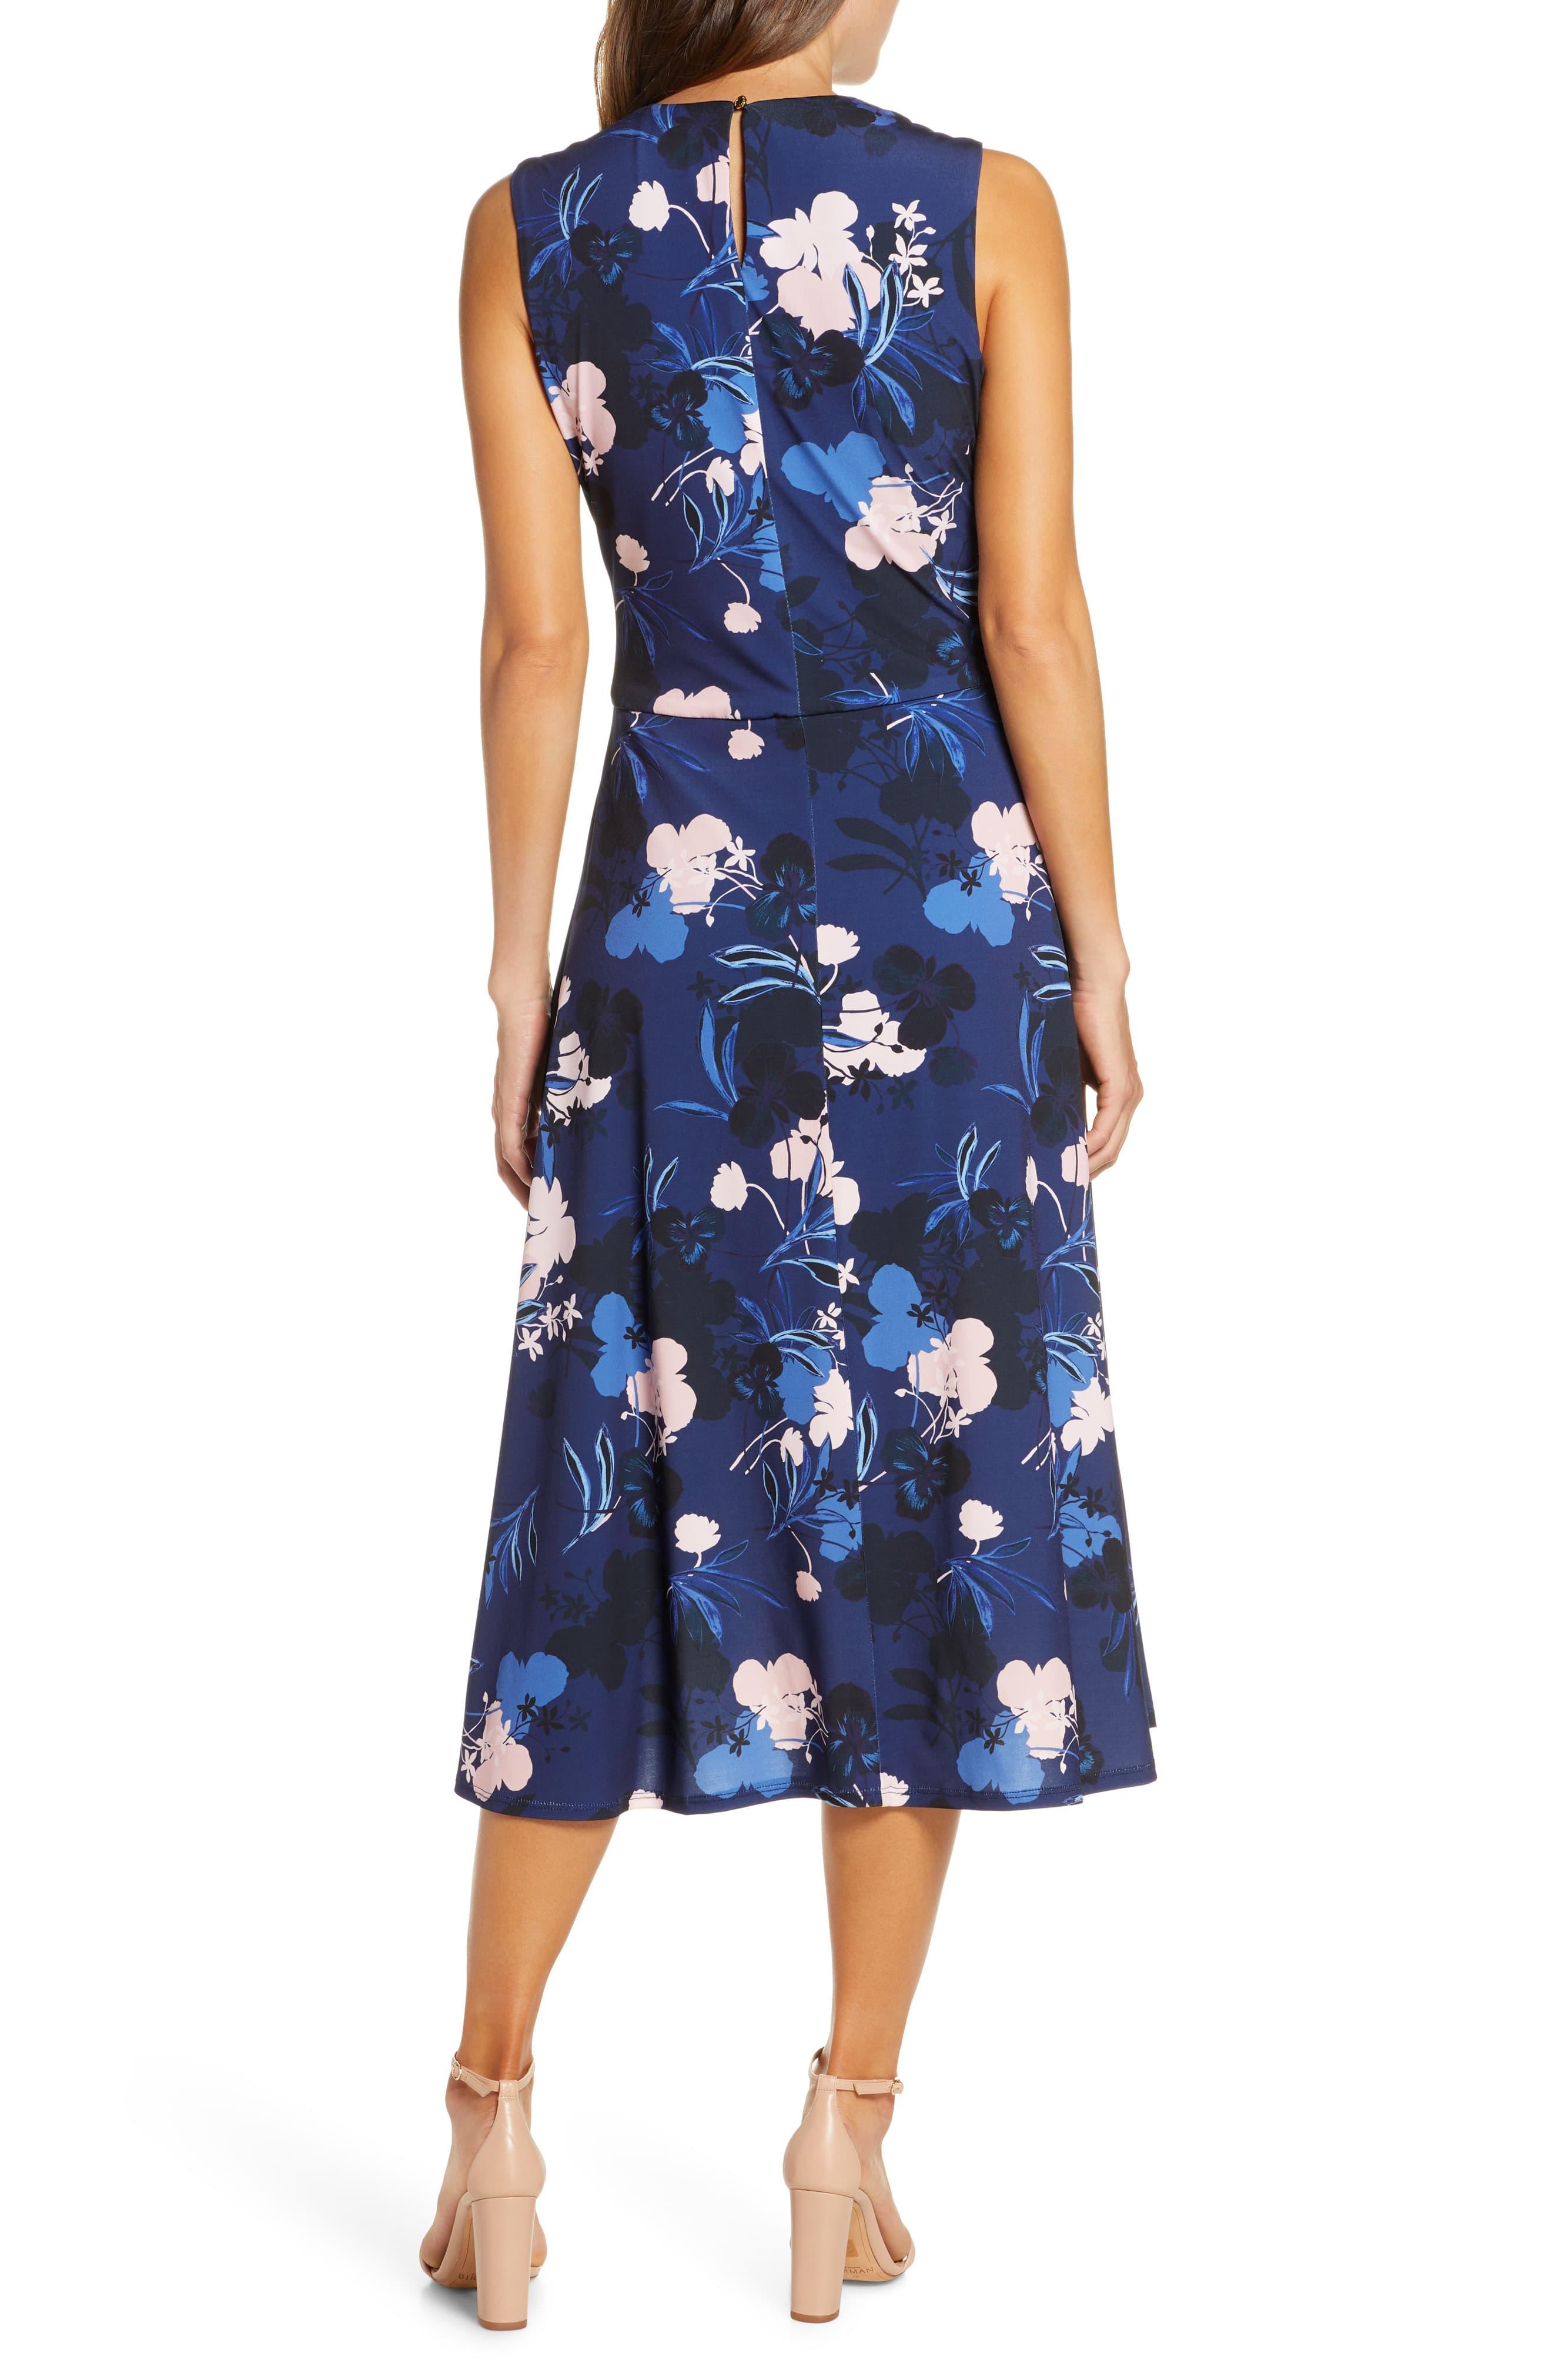 Vince Camuto Floral Twist Front Sleeveless Midi Dress in Blue - Lyst